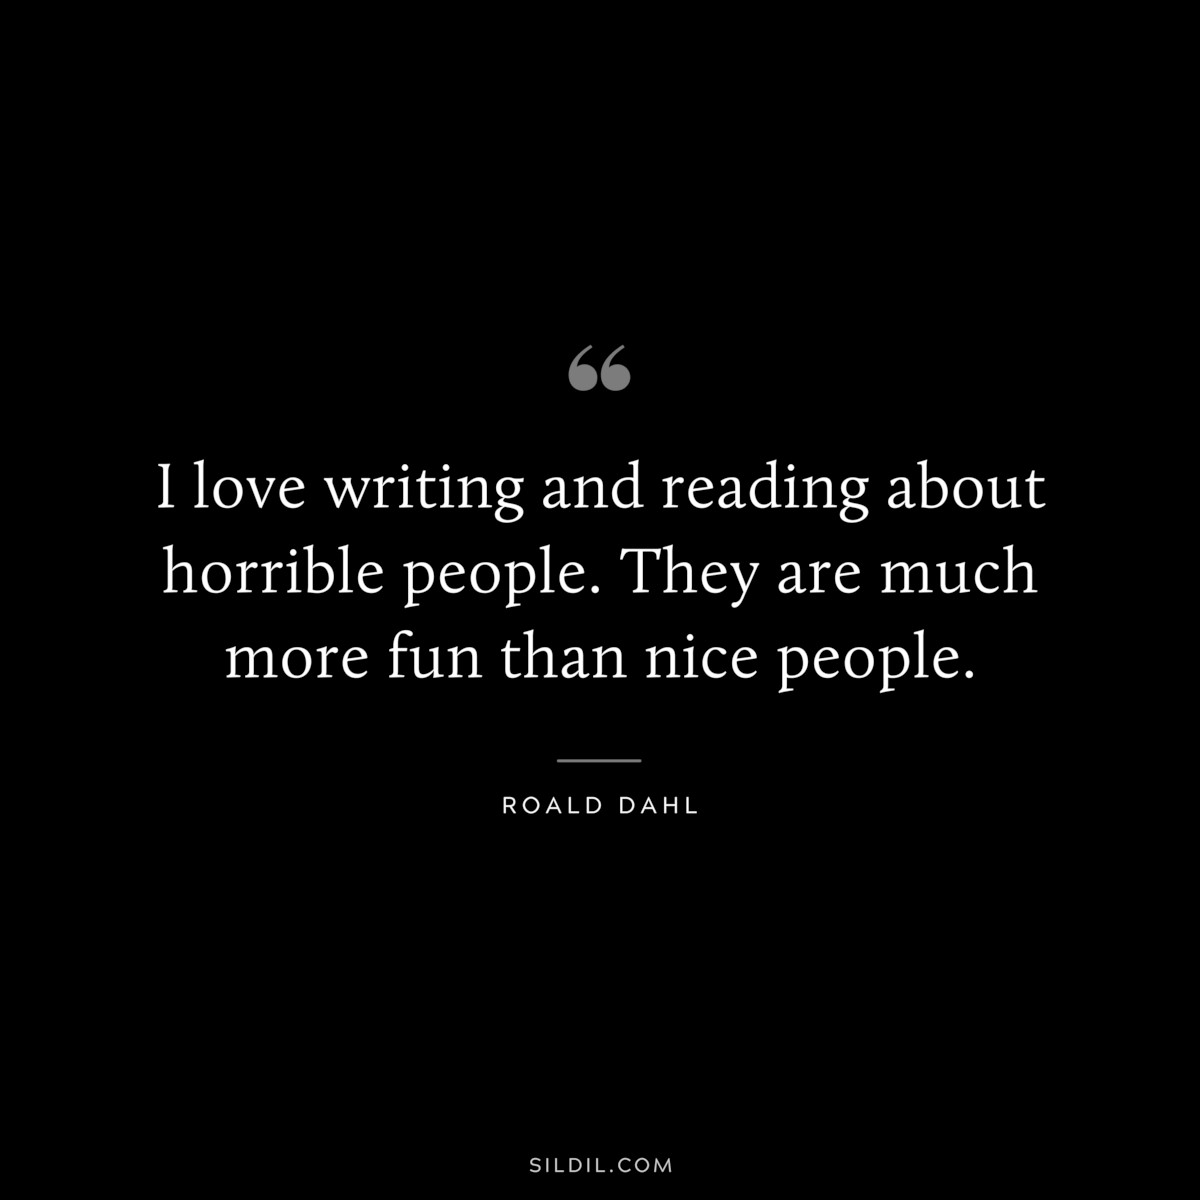 I love writing and reading about horrible people. They are much more fun than nice people. ― Roald Dahl